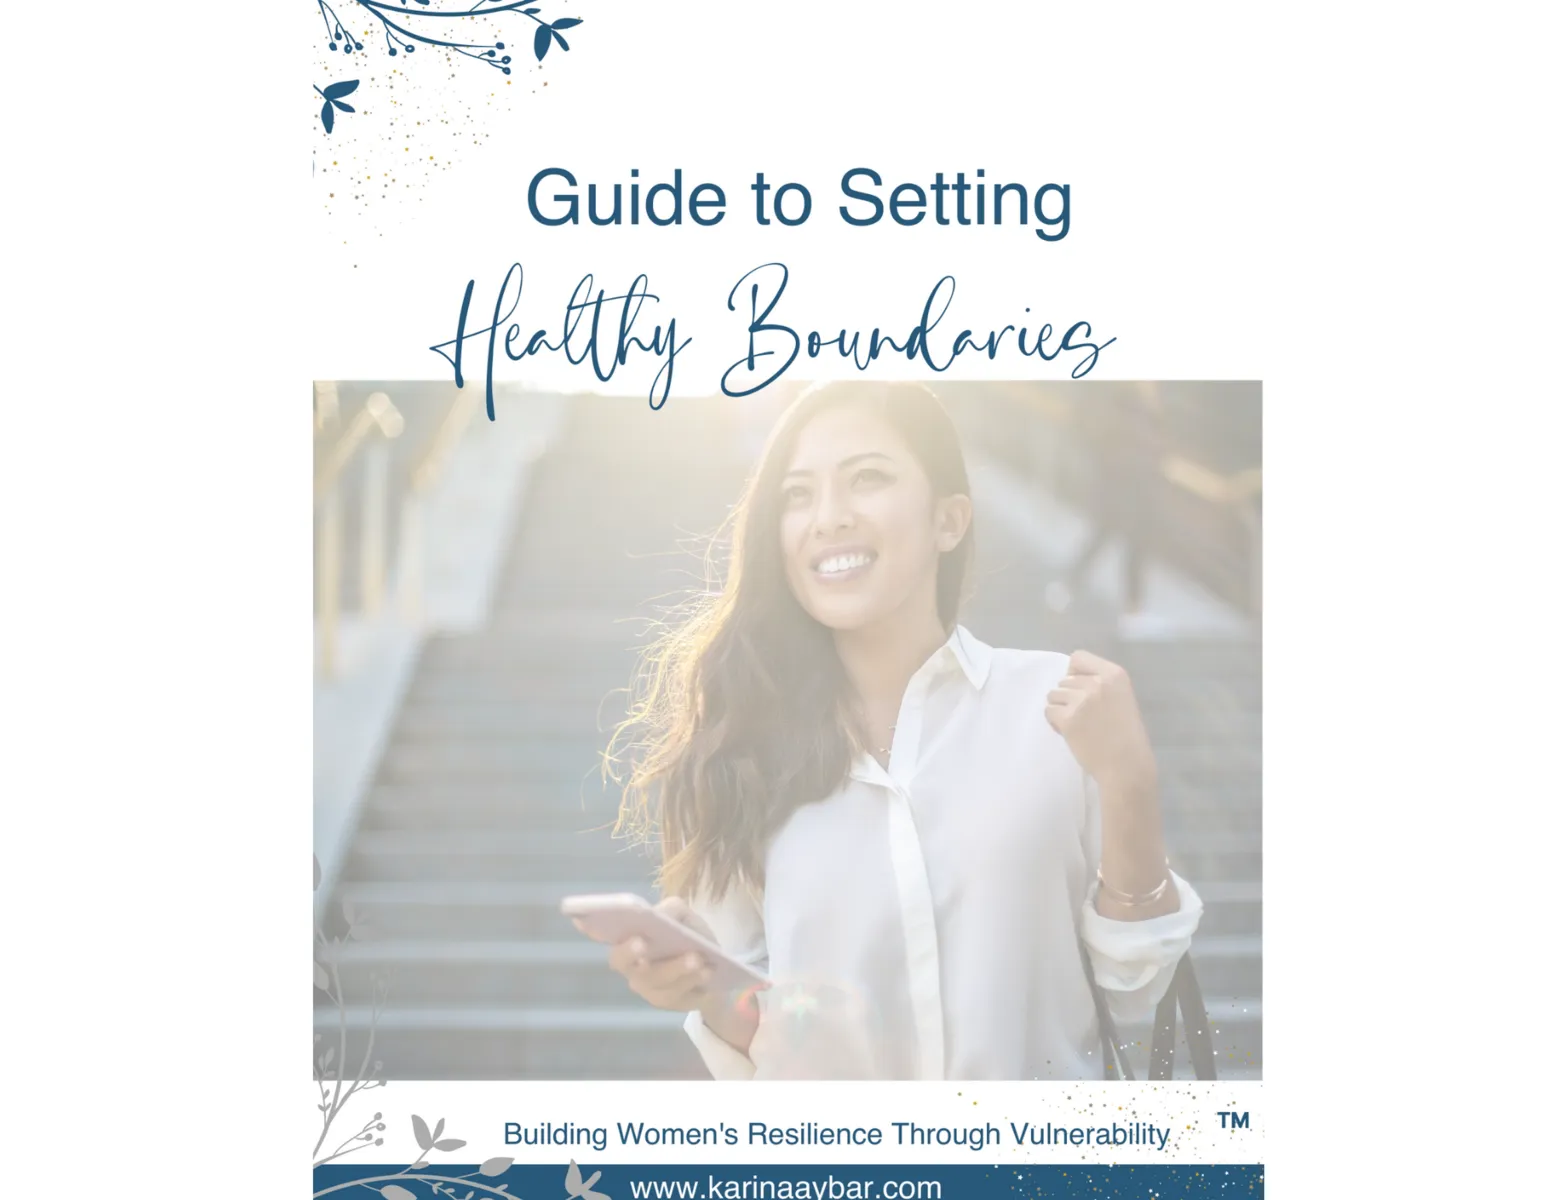 Guide to Setting Healthy Boundaries